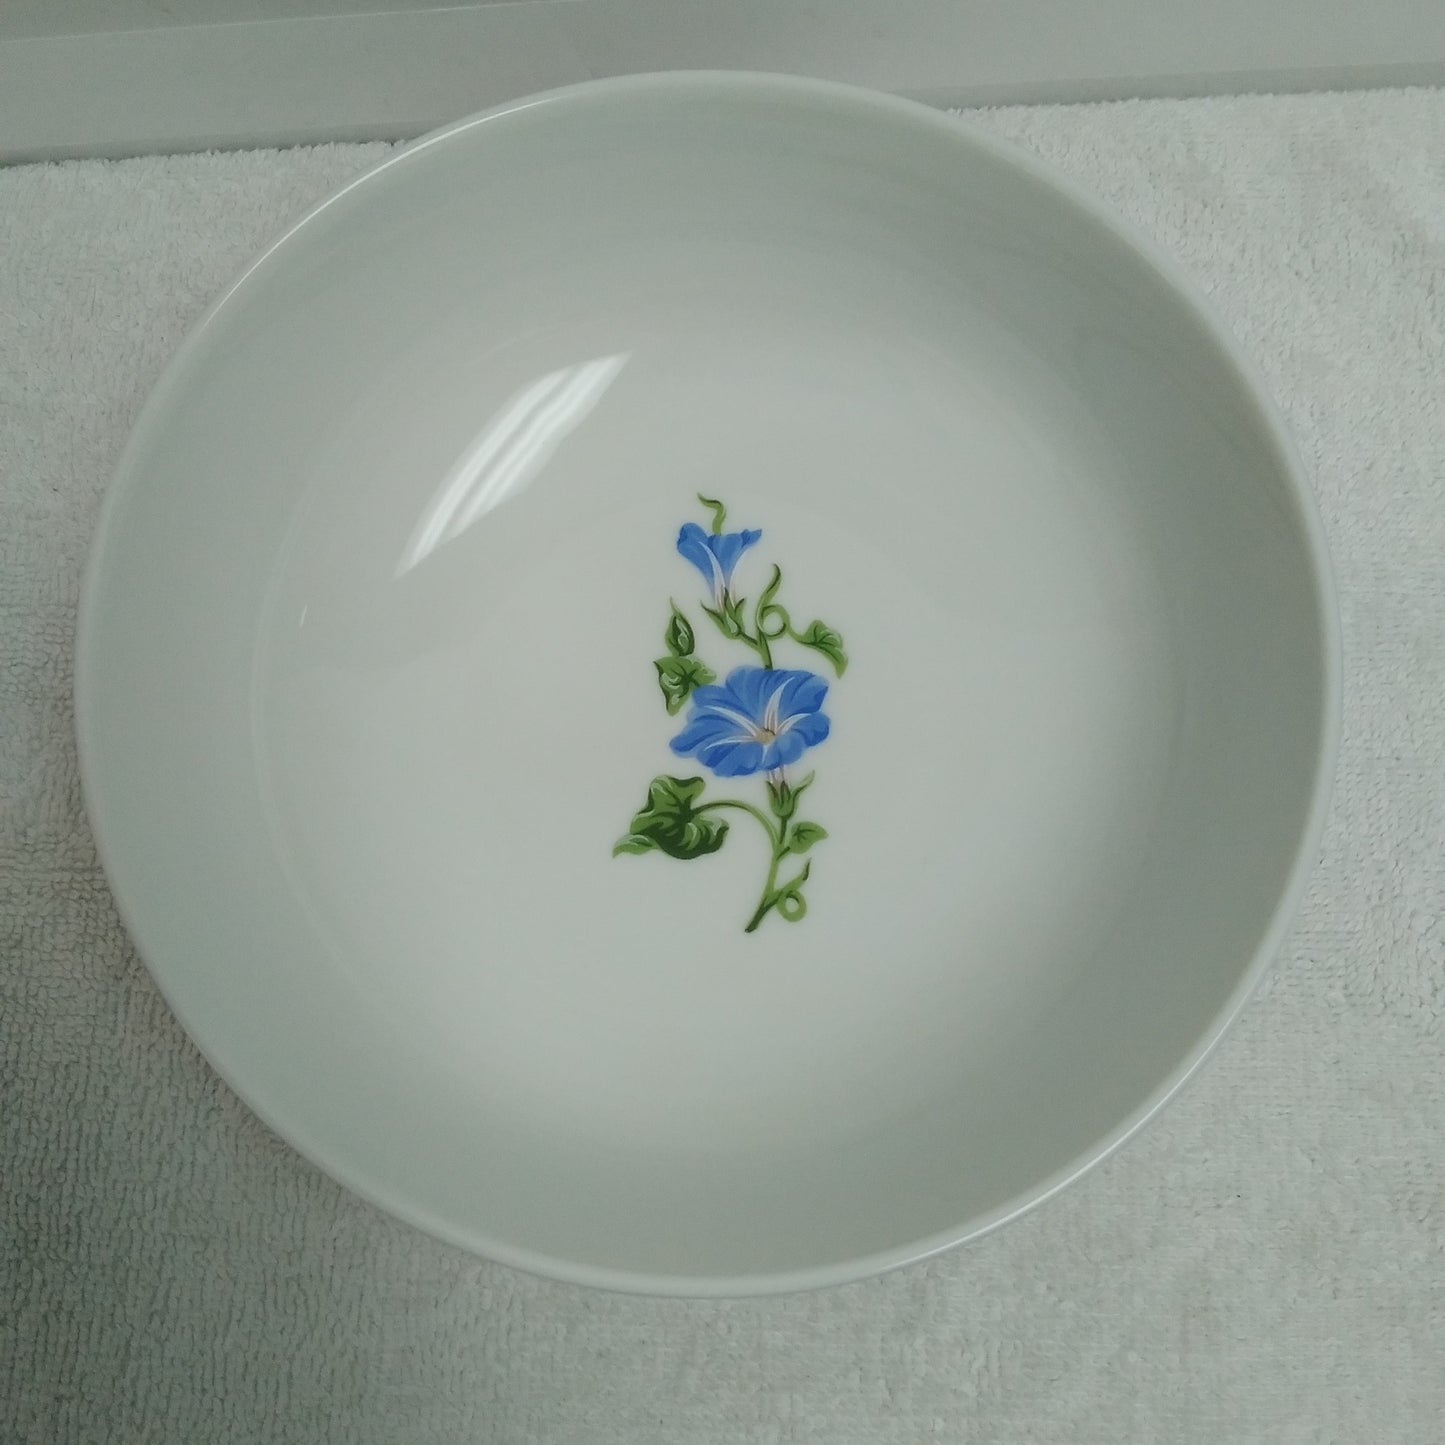 Tiffany & Co. "Merrion Square by Sybil Connolly" 7.5 inch Round Vegetable Bowl